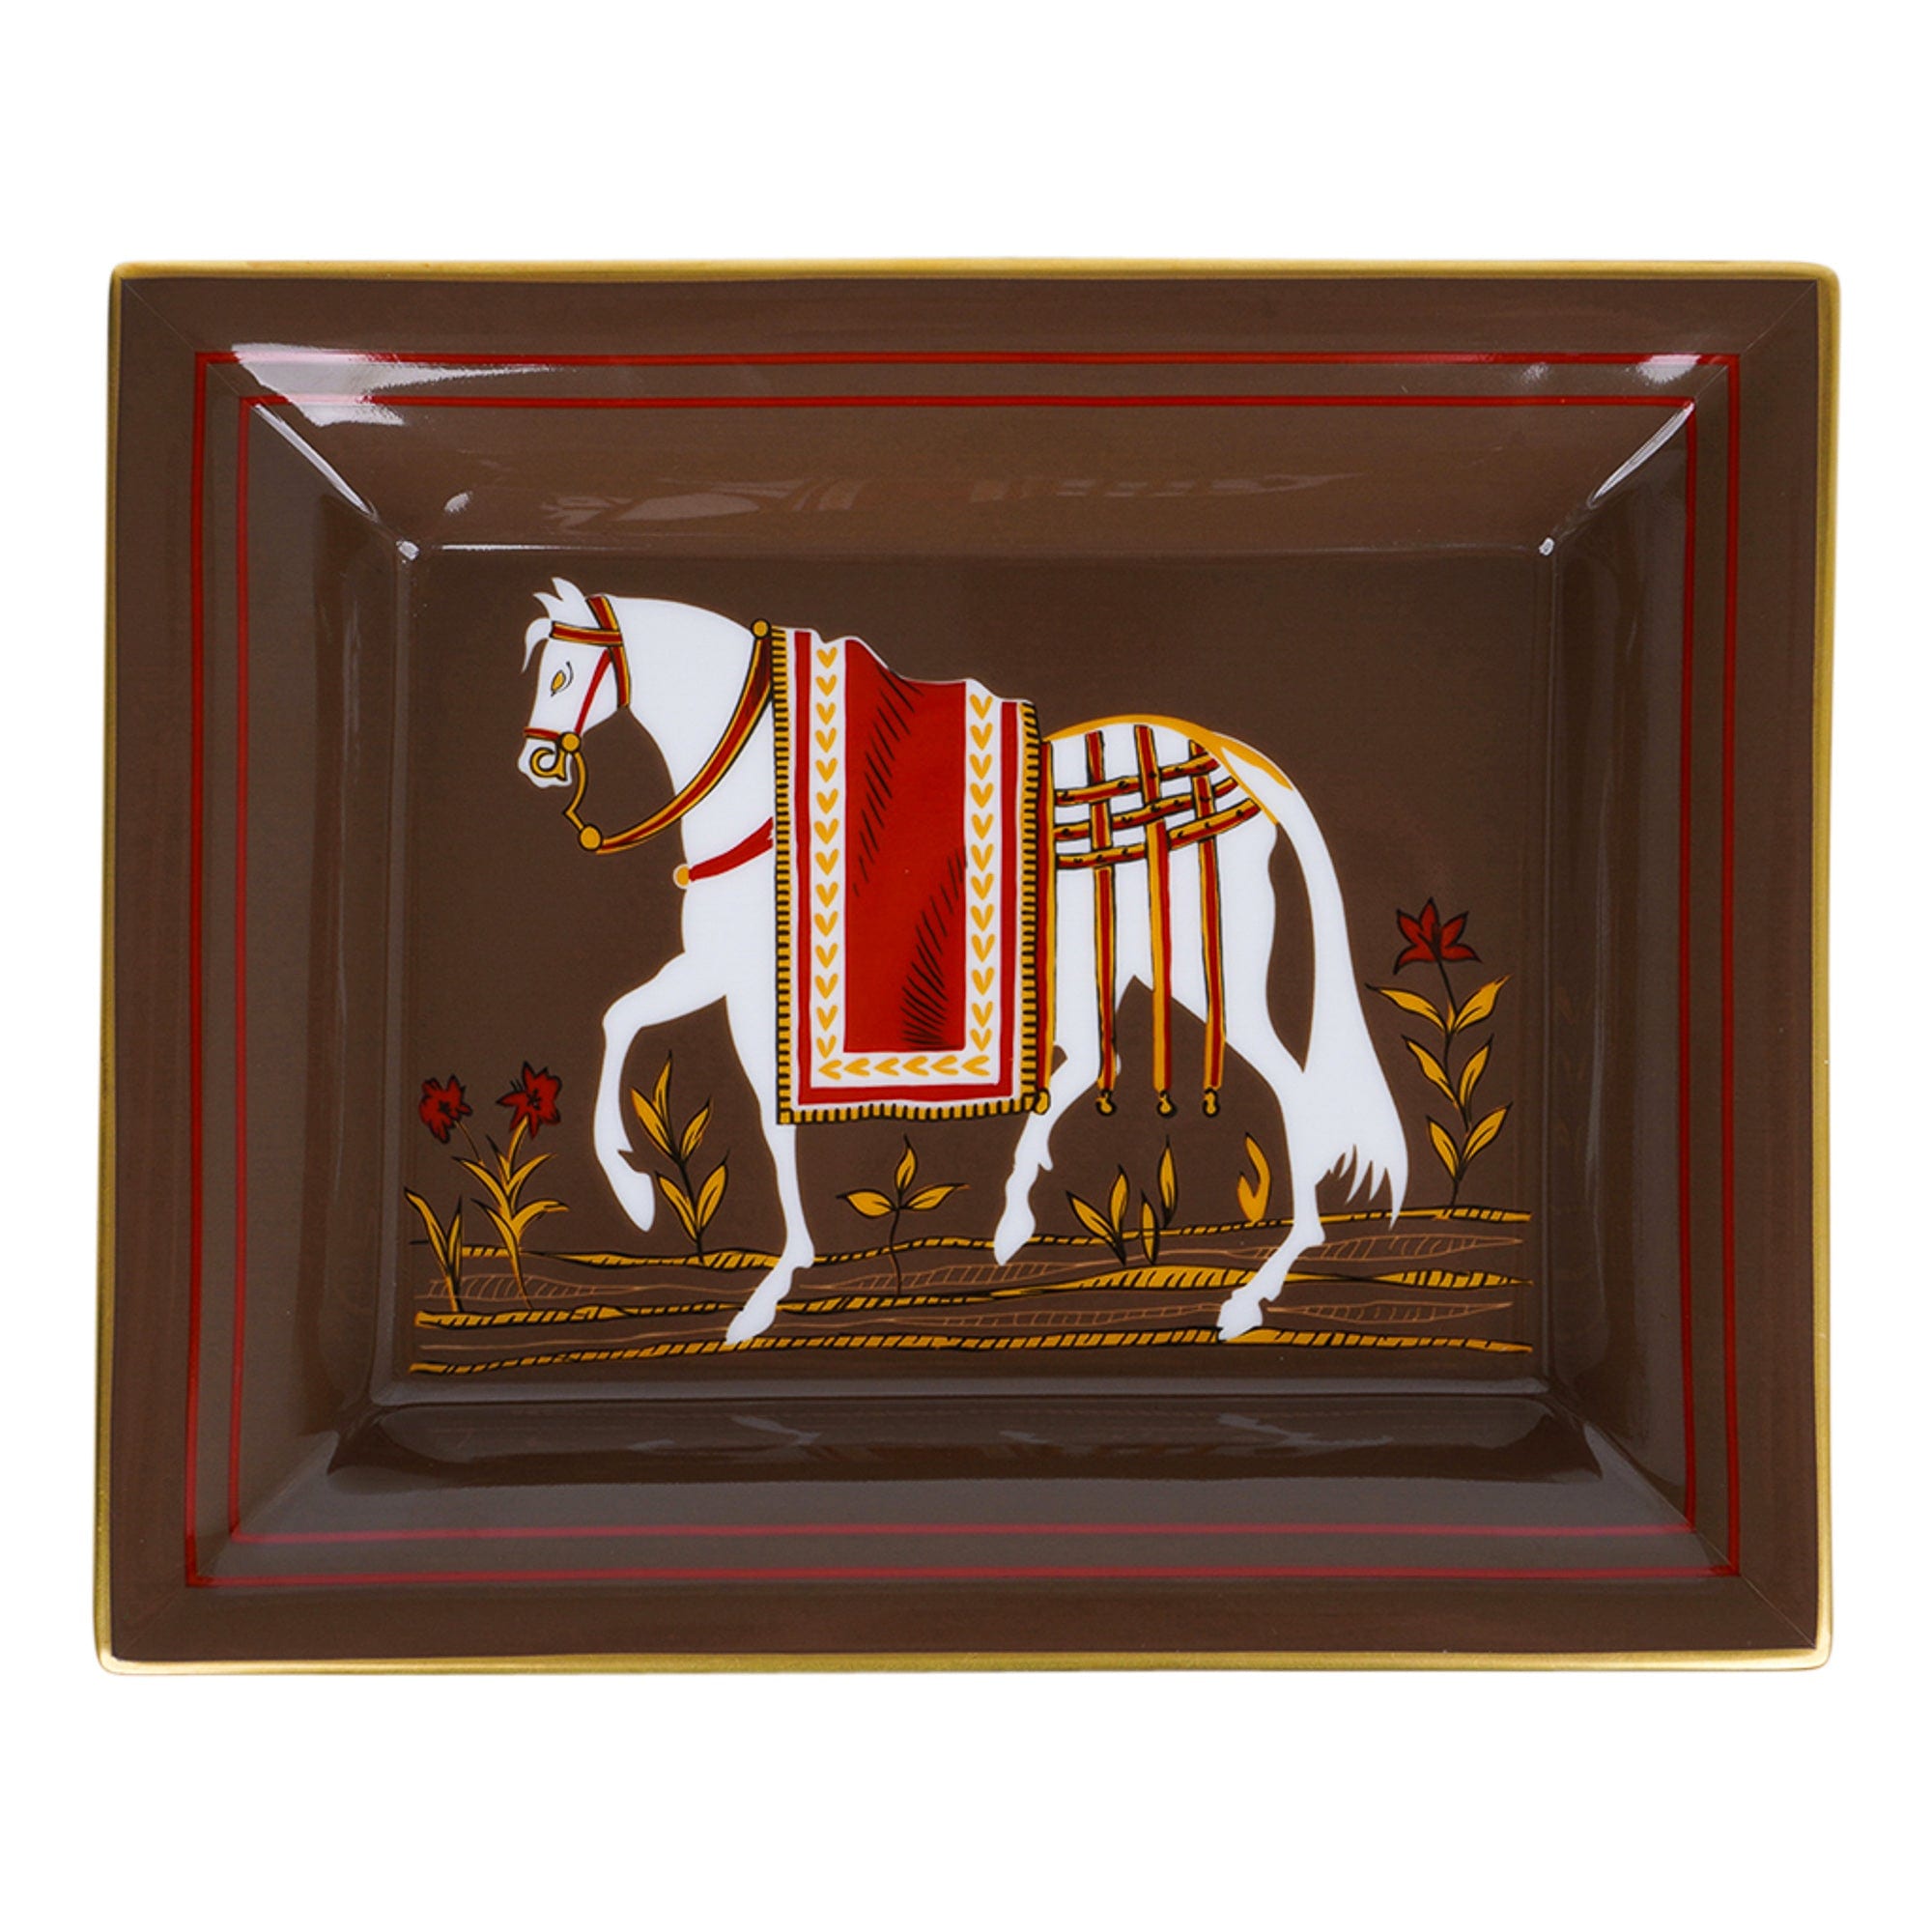 Hermes Equestrian Brown / White Limoges Porcelain Change Tray